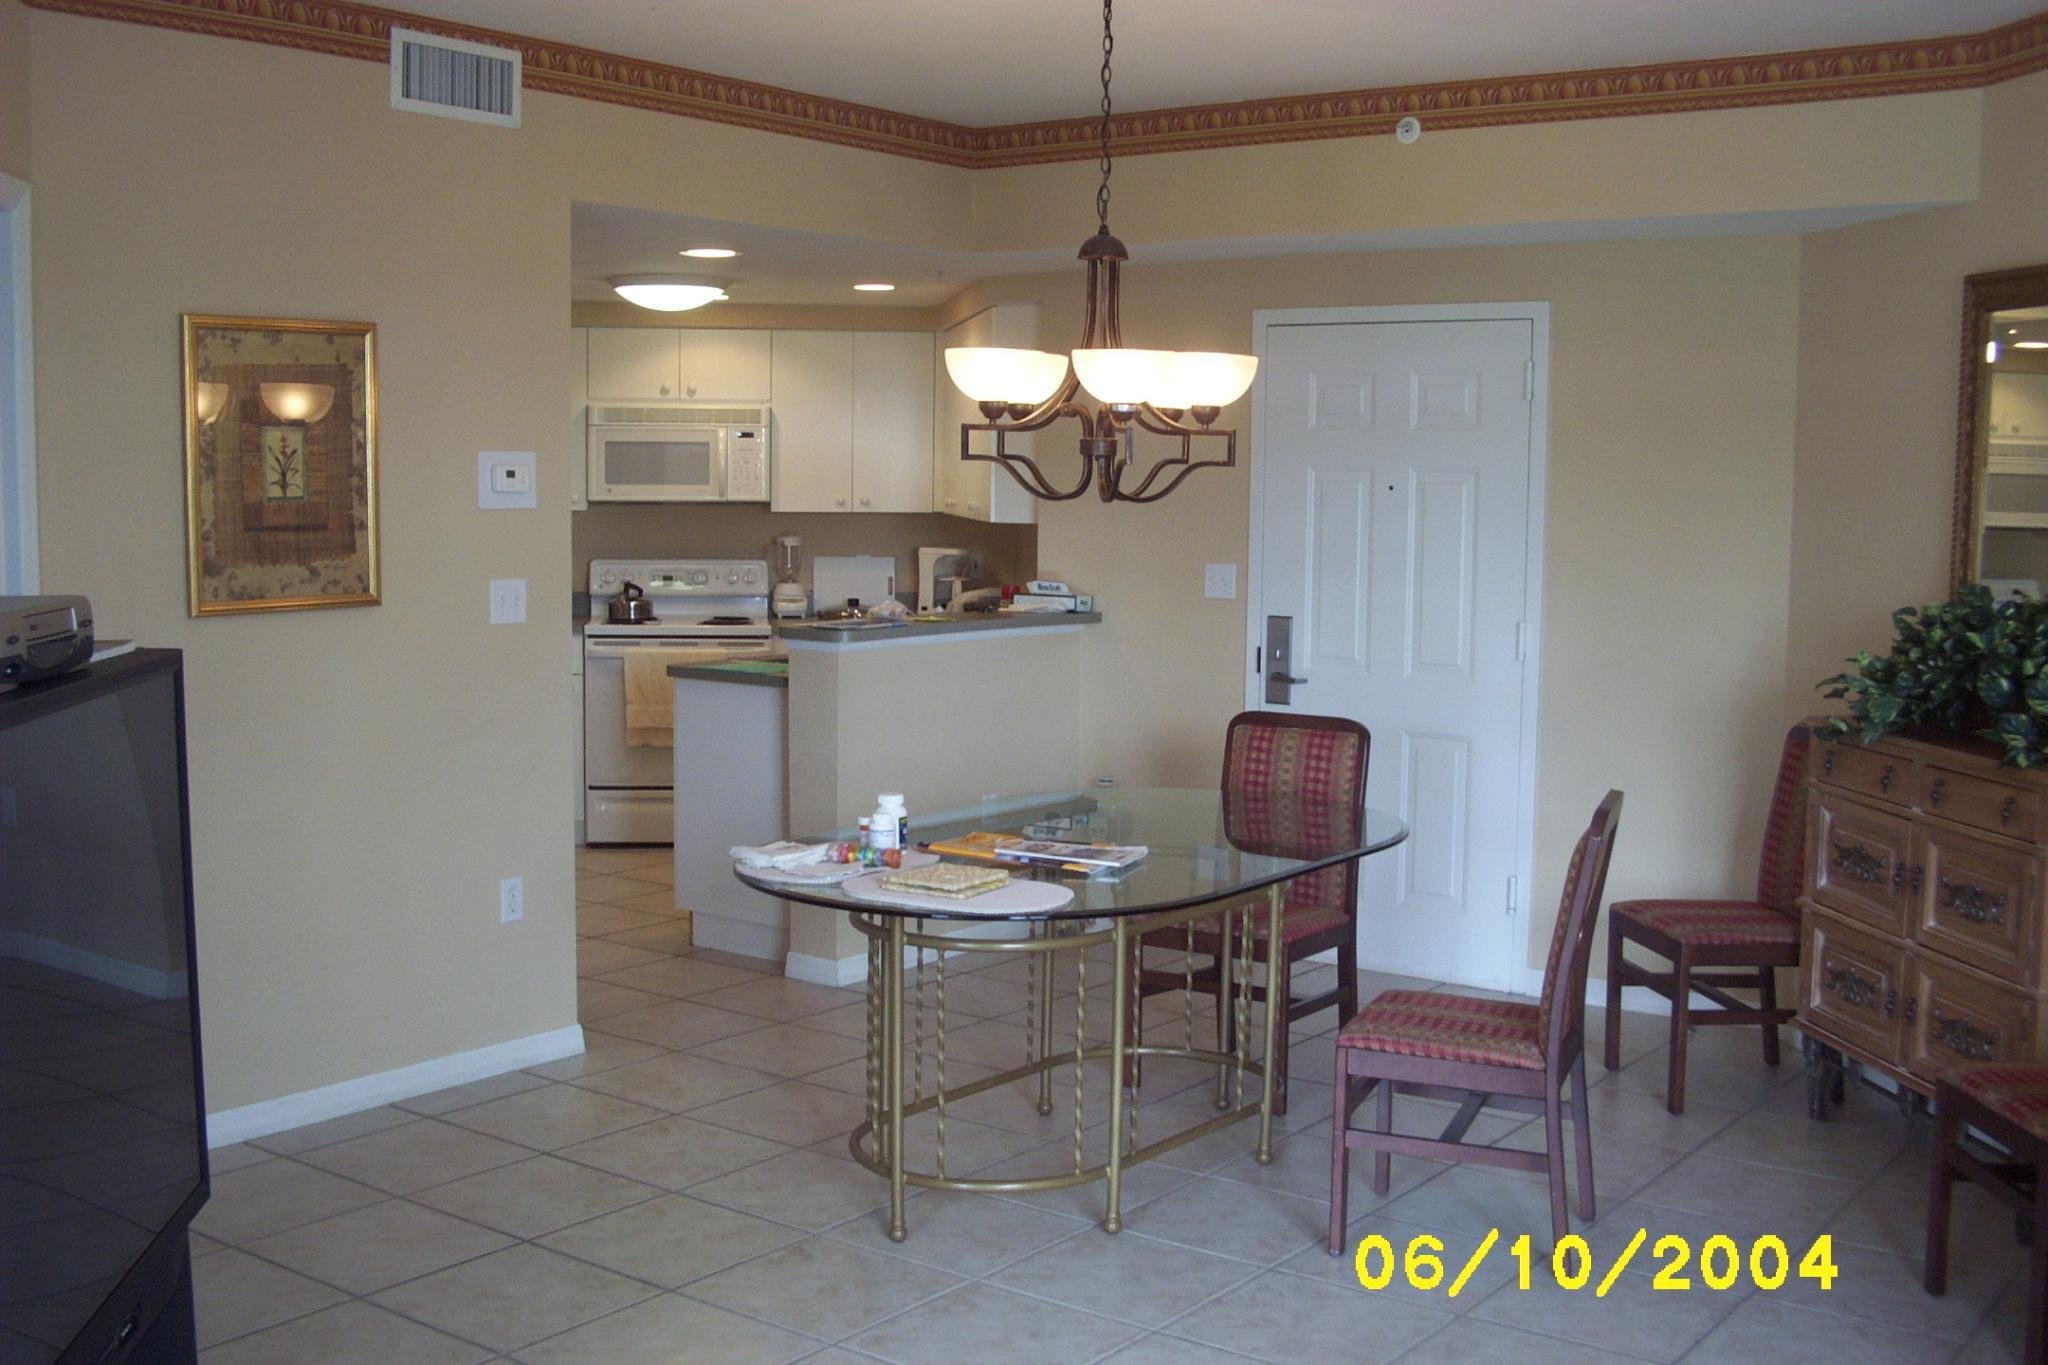 - Unit Kitchen and Dining Area